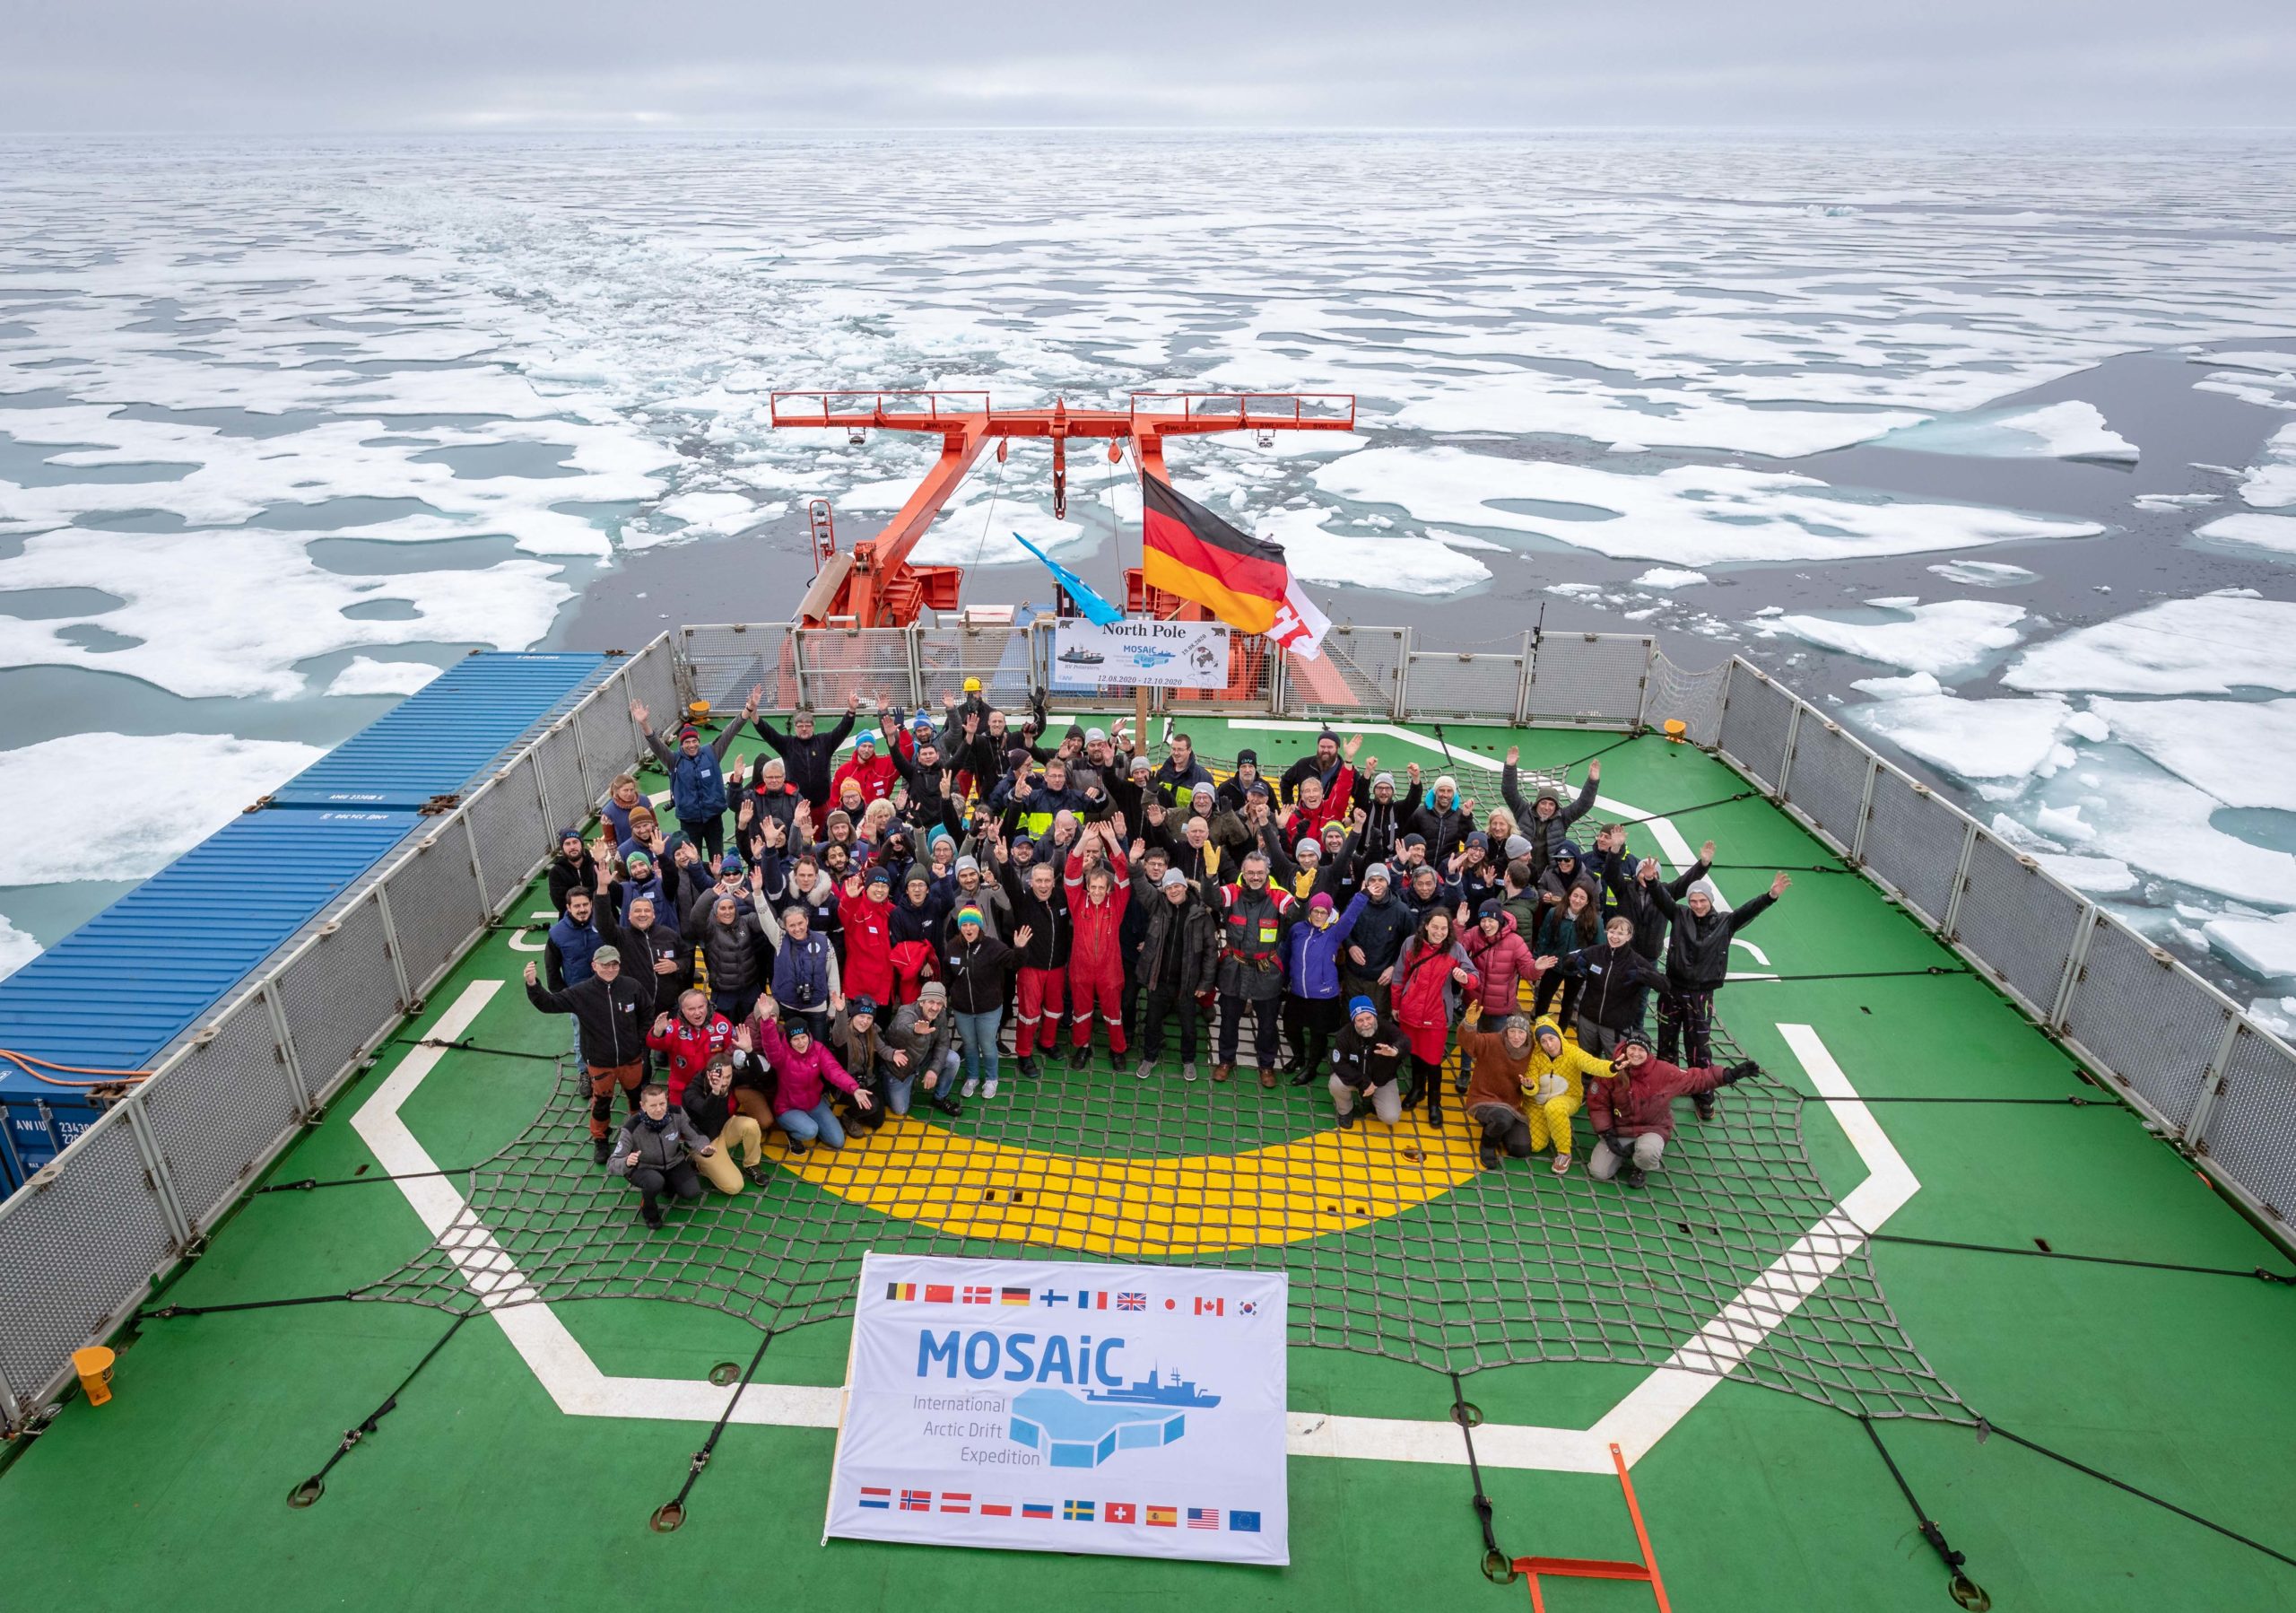 The MOSAiC scientists and support staff on the deck of the Polarstern vessel (Photo: Lianna Nixon/MOSAiC)